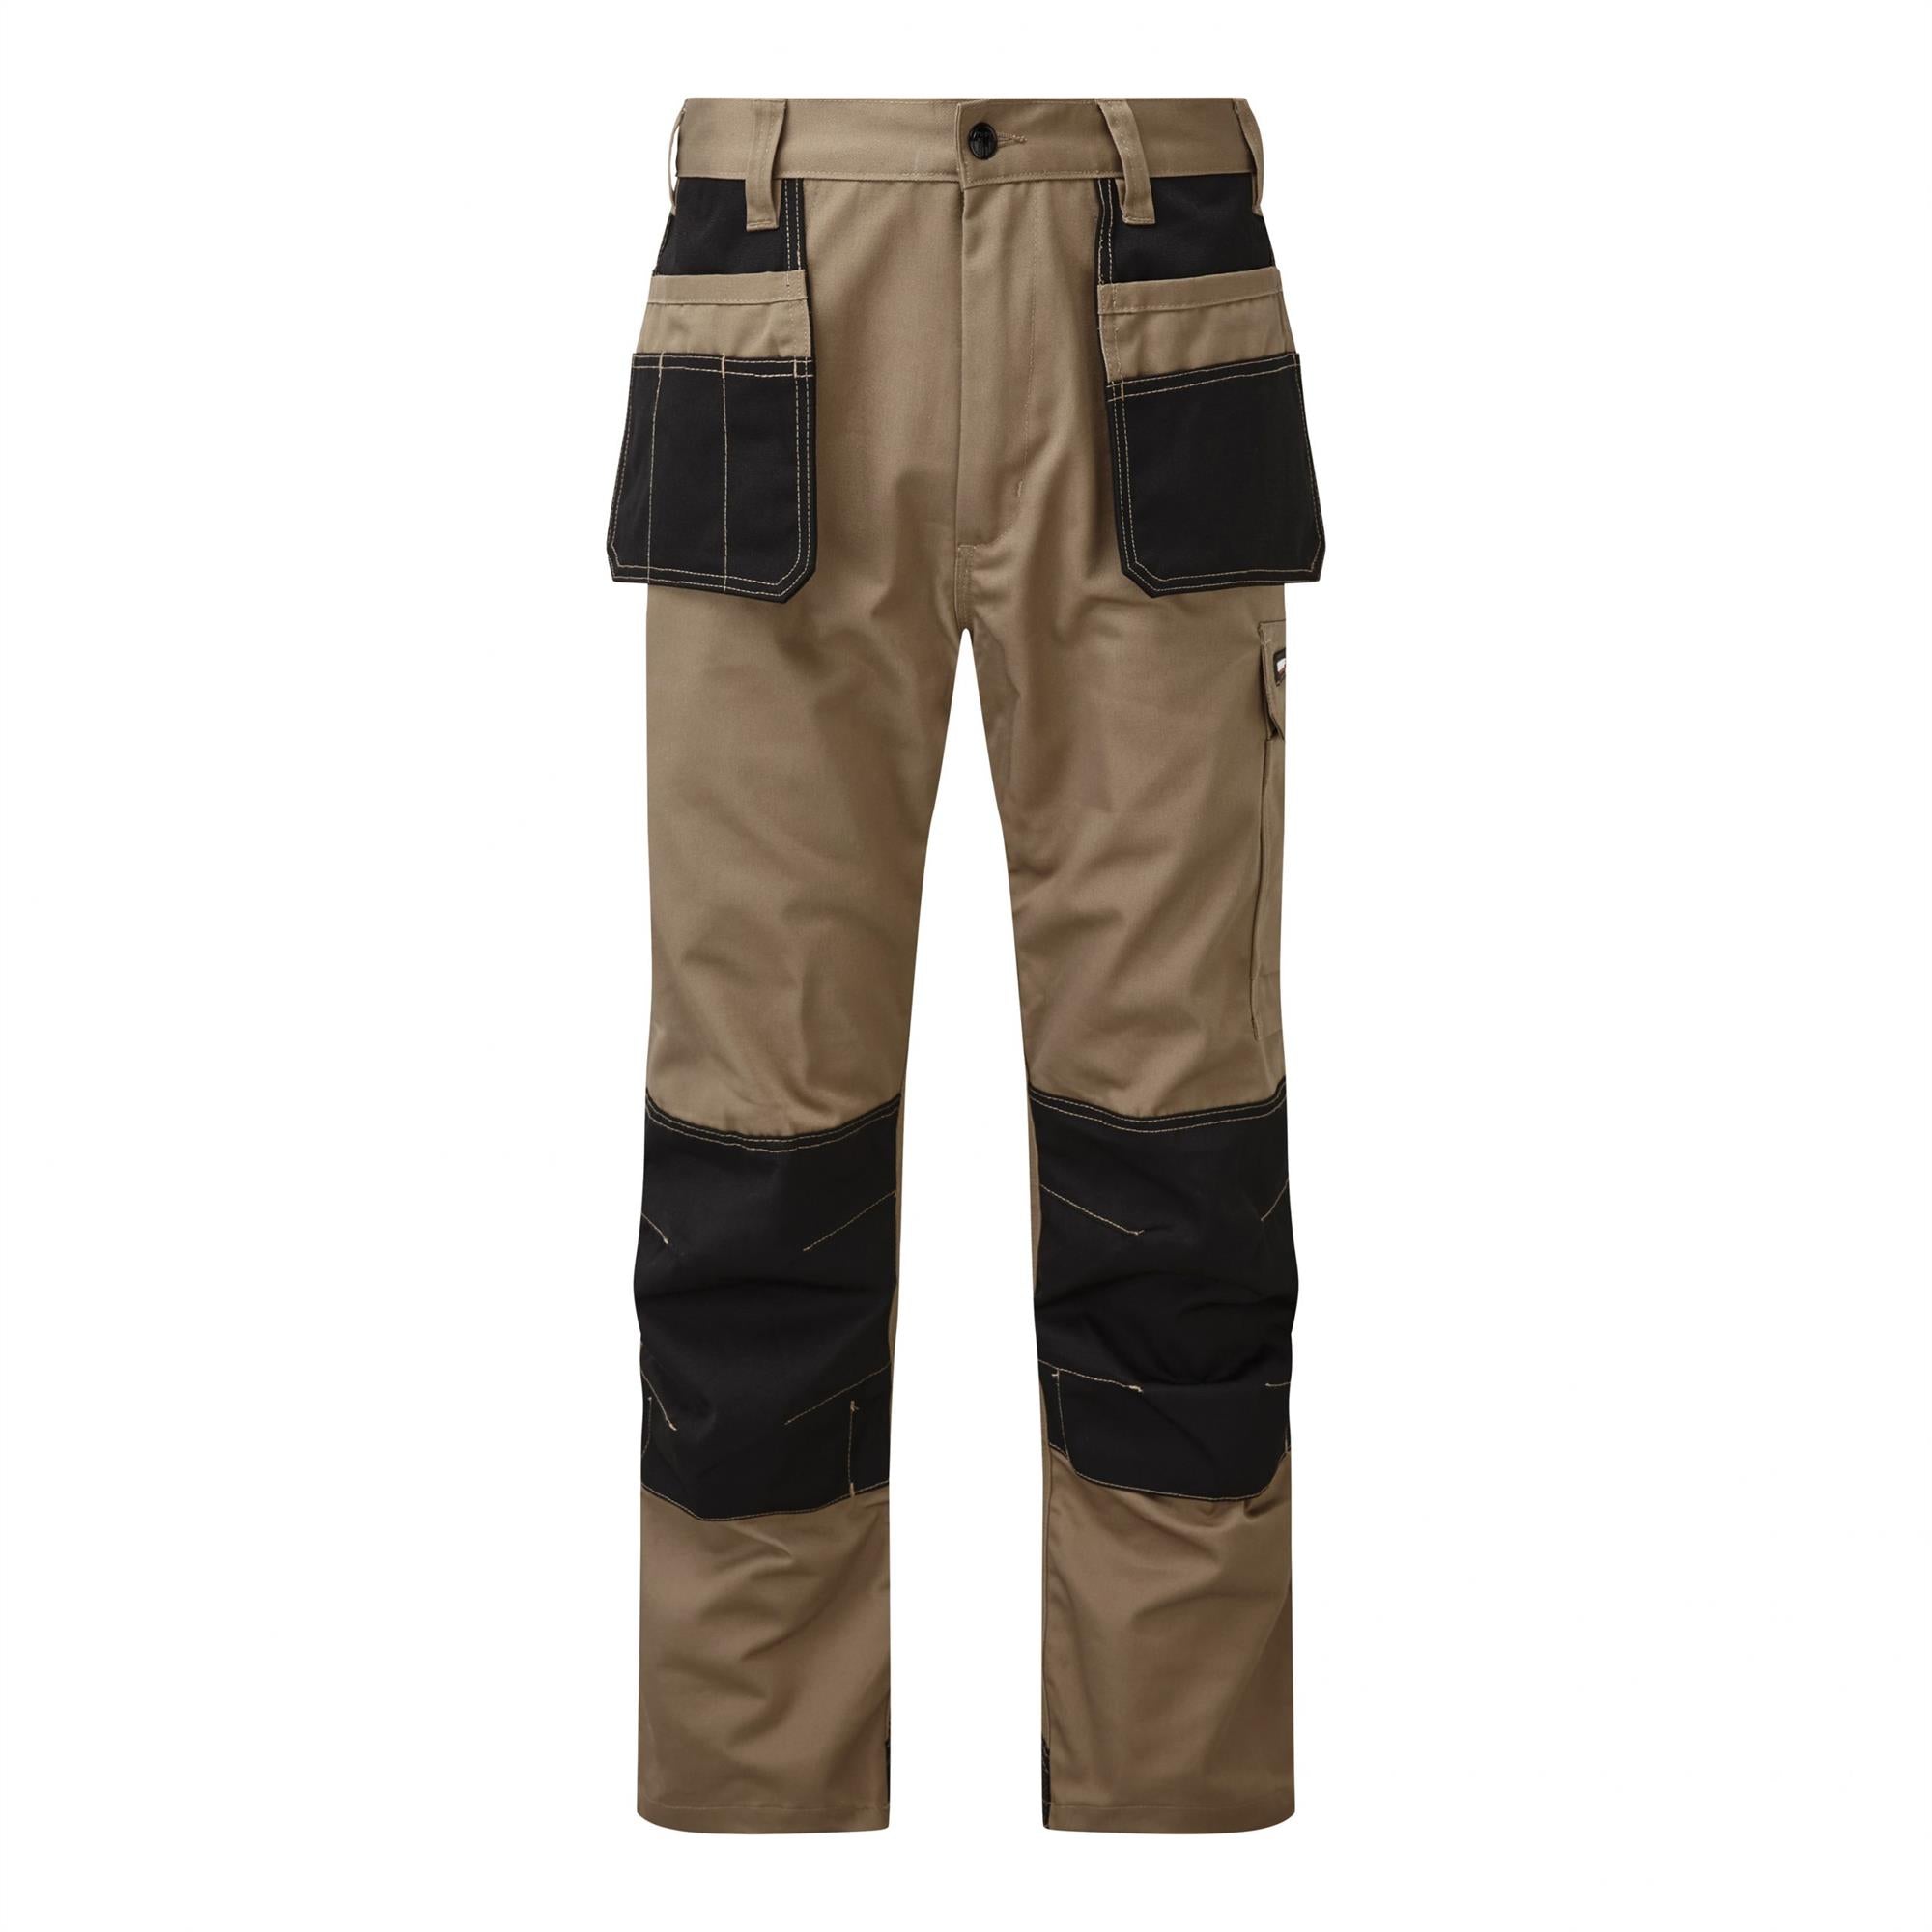 TuffStuff Excel sand/black contrast heavyweight poly-cotton holster pocket work cargo trouser #710